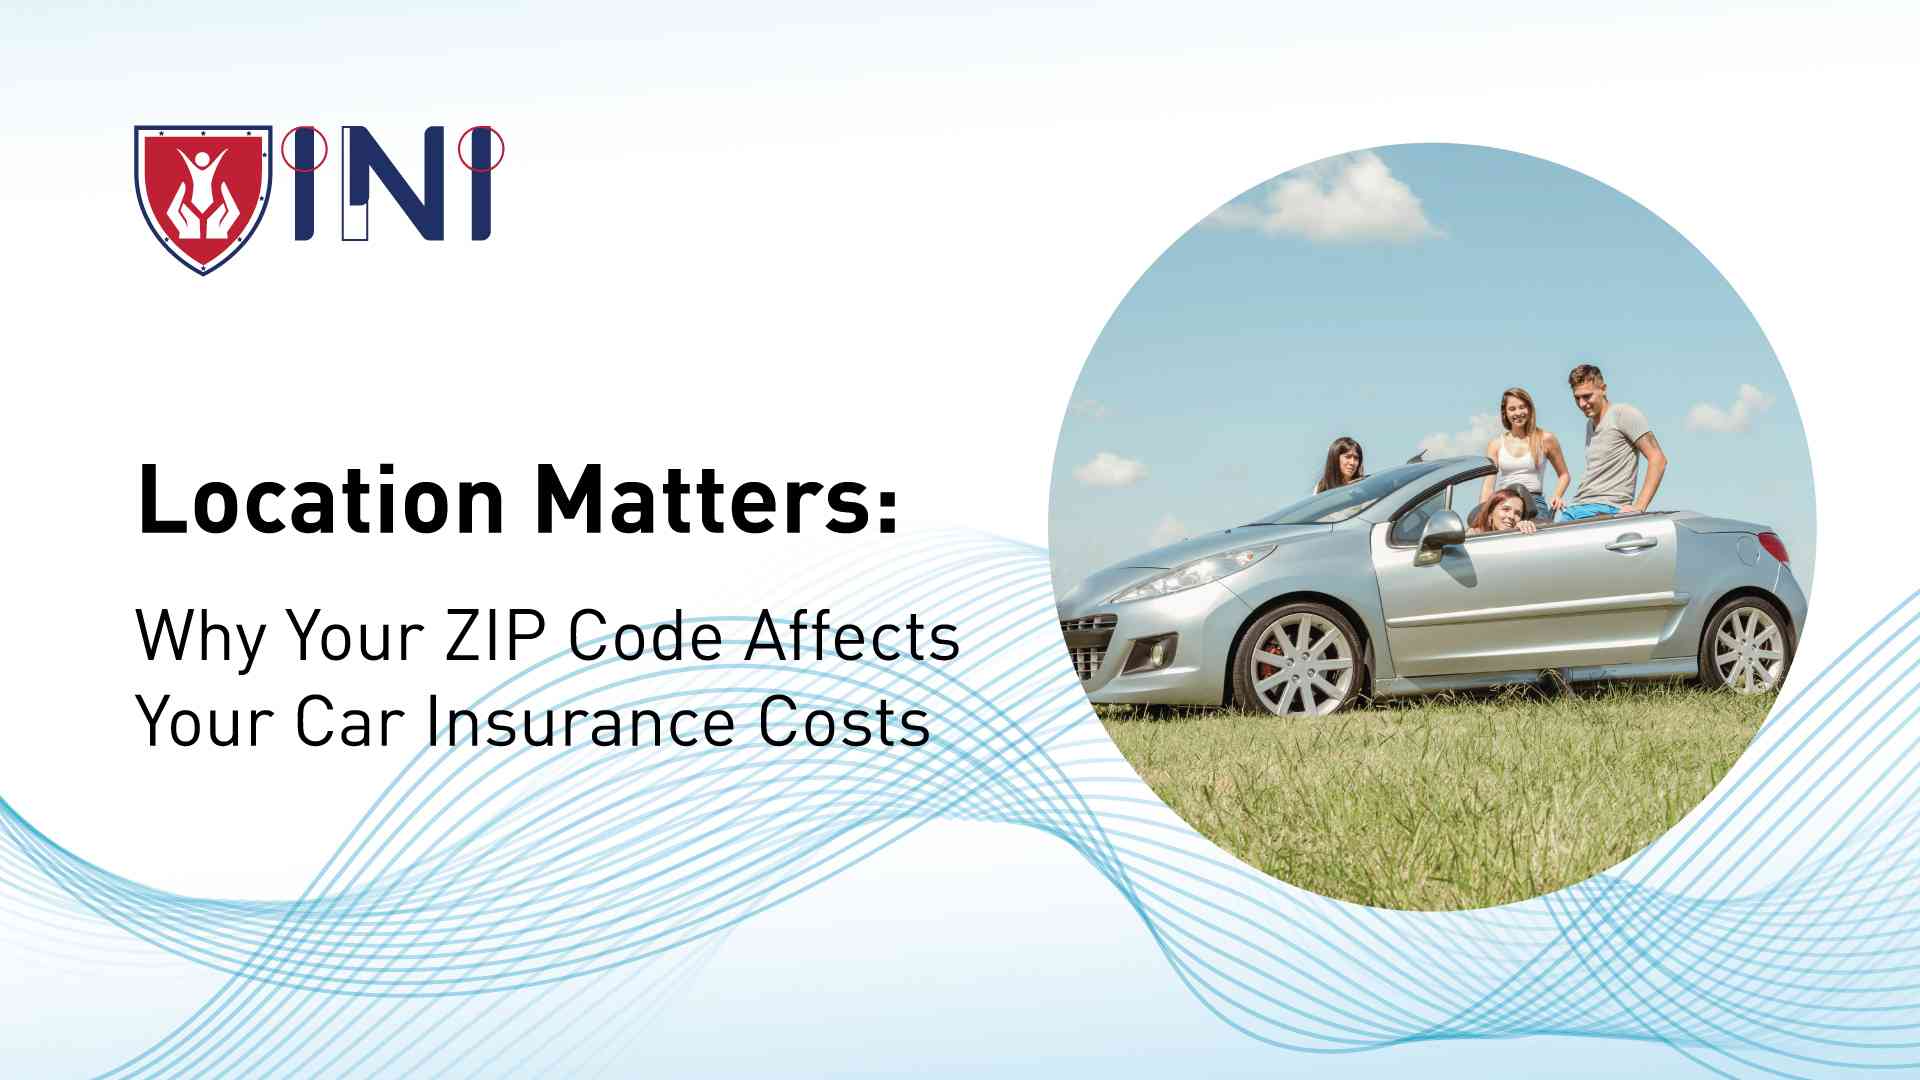 Location Matters: Why Your ZIP Code Affects Your Car Insurance Costs